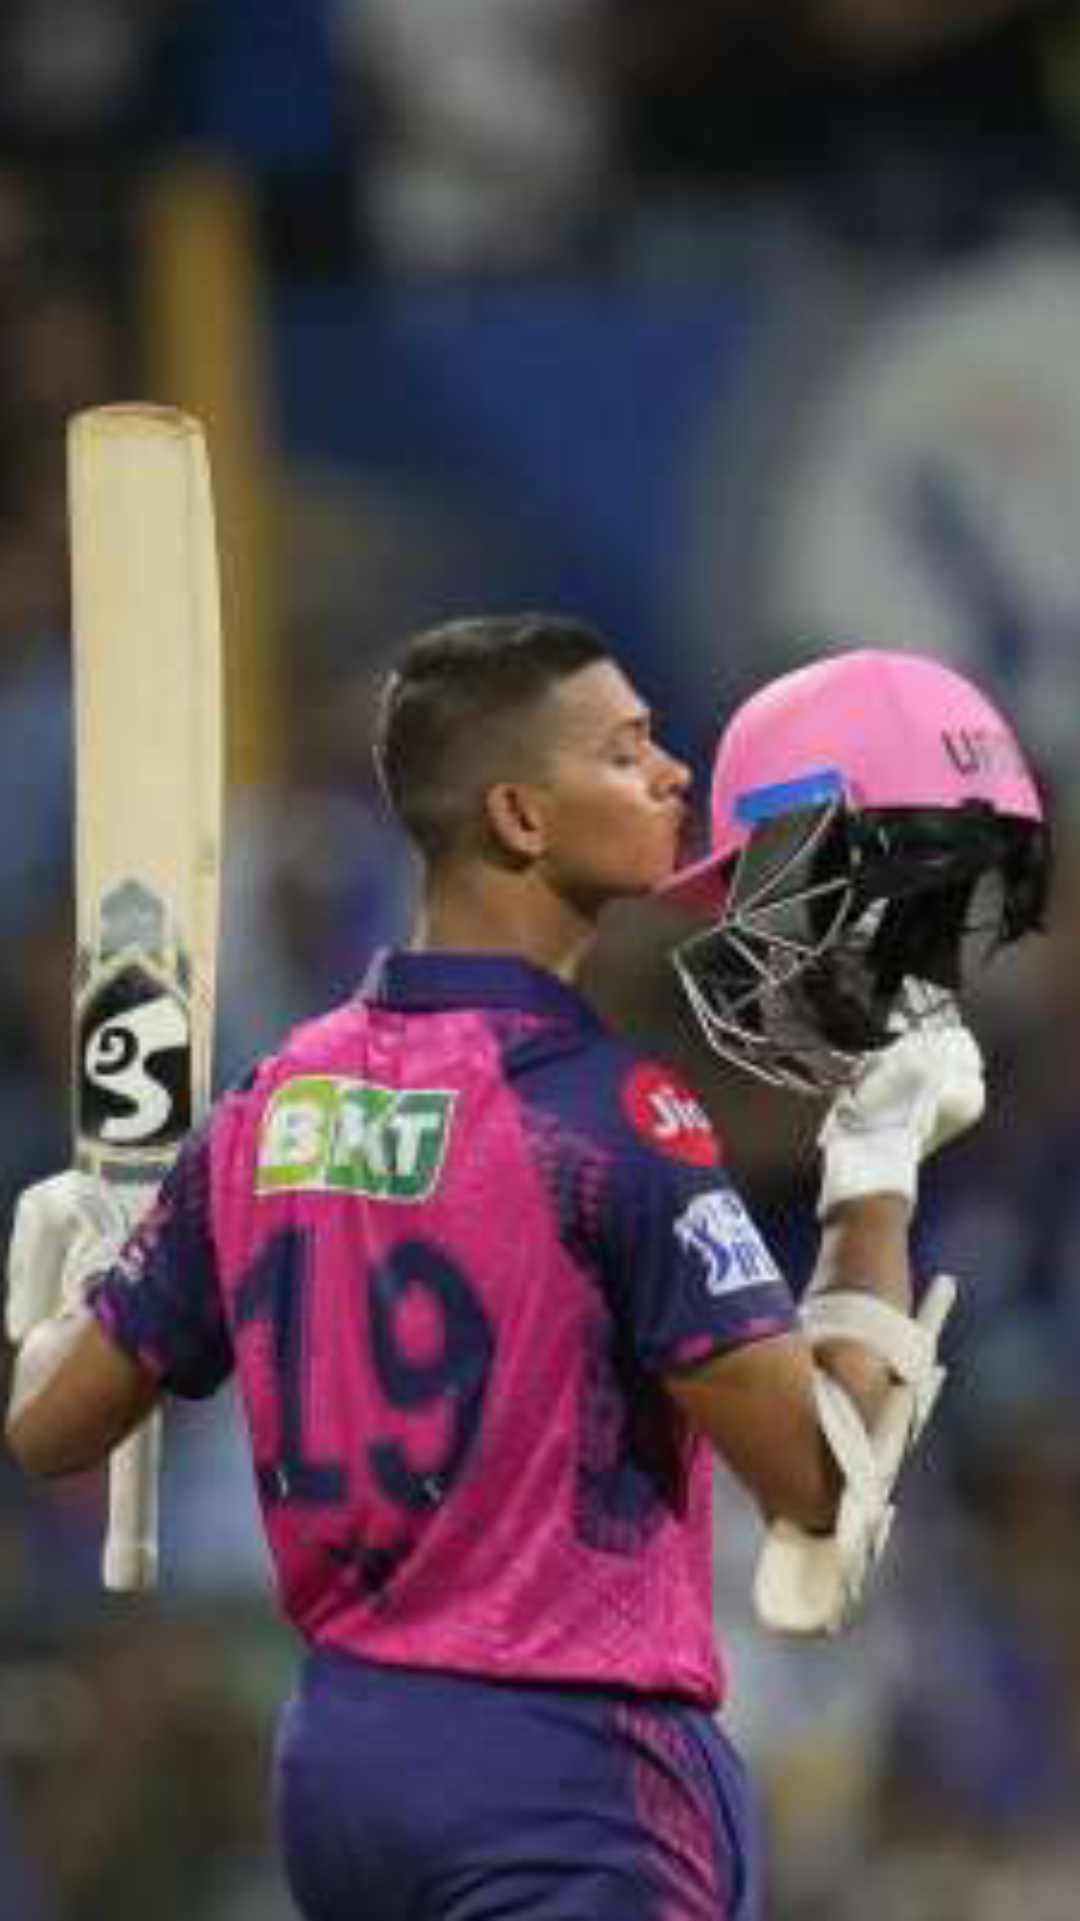 From Yashasvi Jaiswal to Sanju Samson, list of youngest batters to hit century in IPL